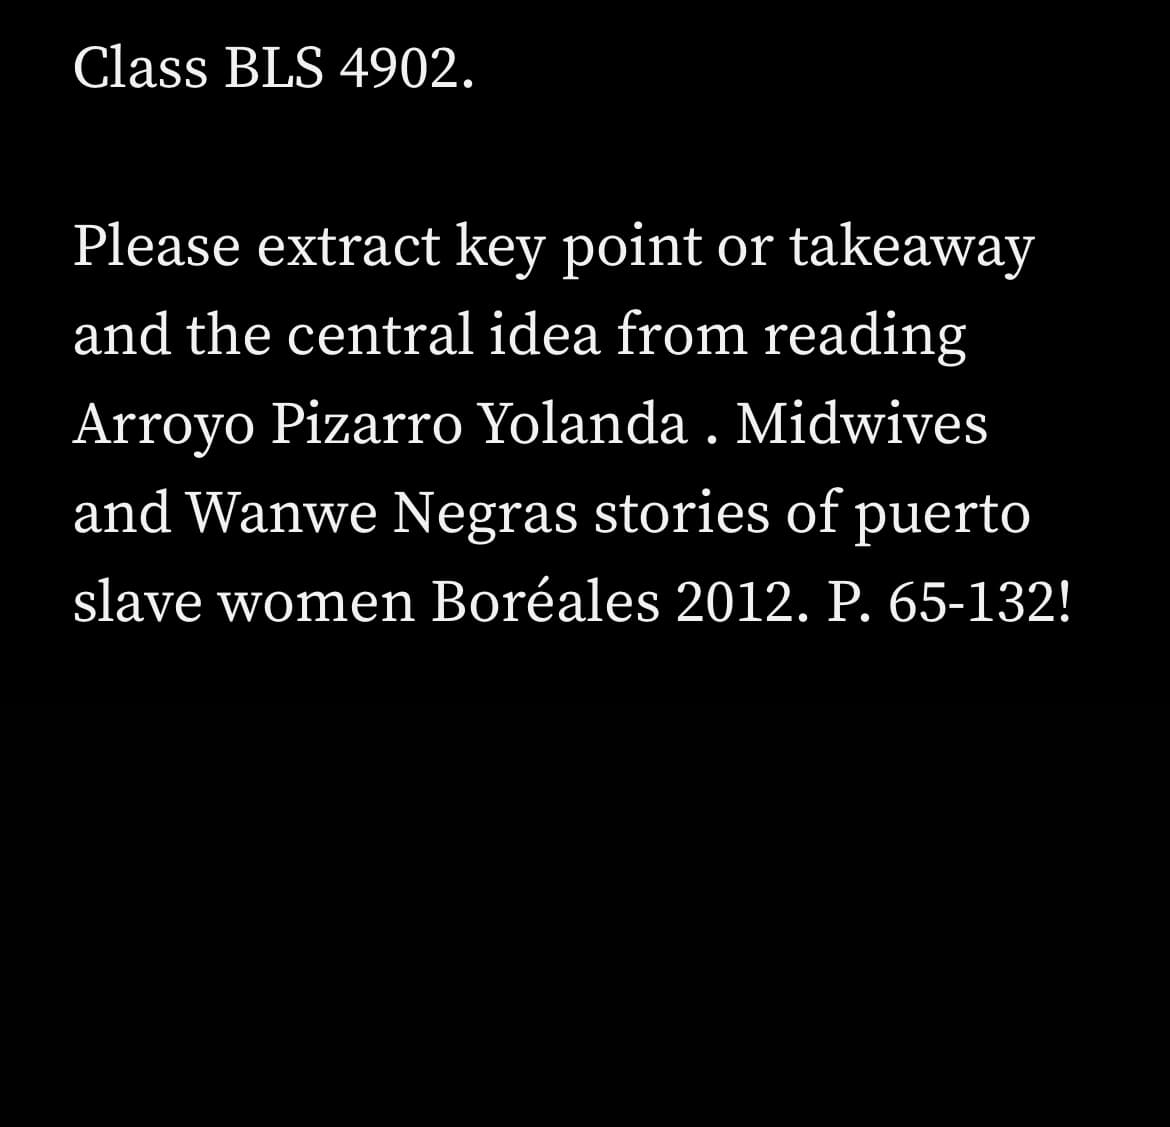 Class BLS 4902.
Please extract key point or takeaway
and the central idea from reading
Arroyo Pizarro Yolanda . Midwives
and Wanwe Negras stories of puerto
slave women Boréales 2012. P. 65-132!